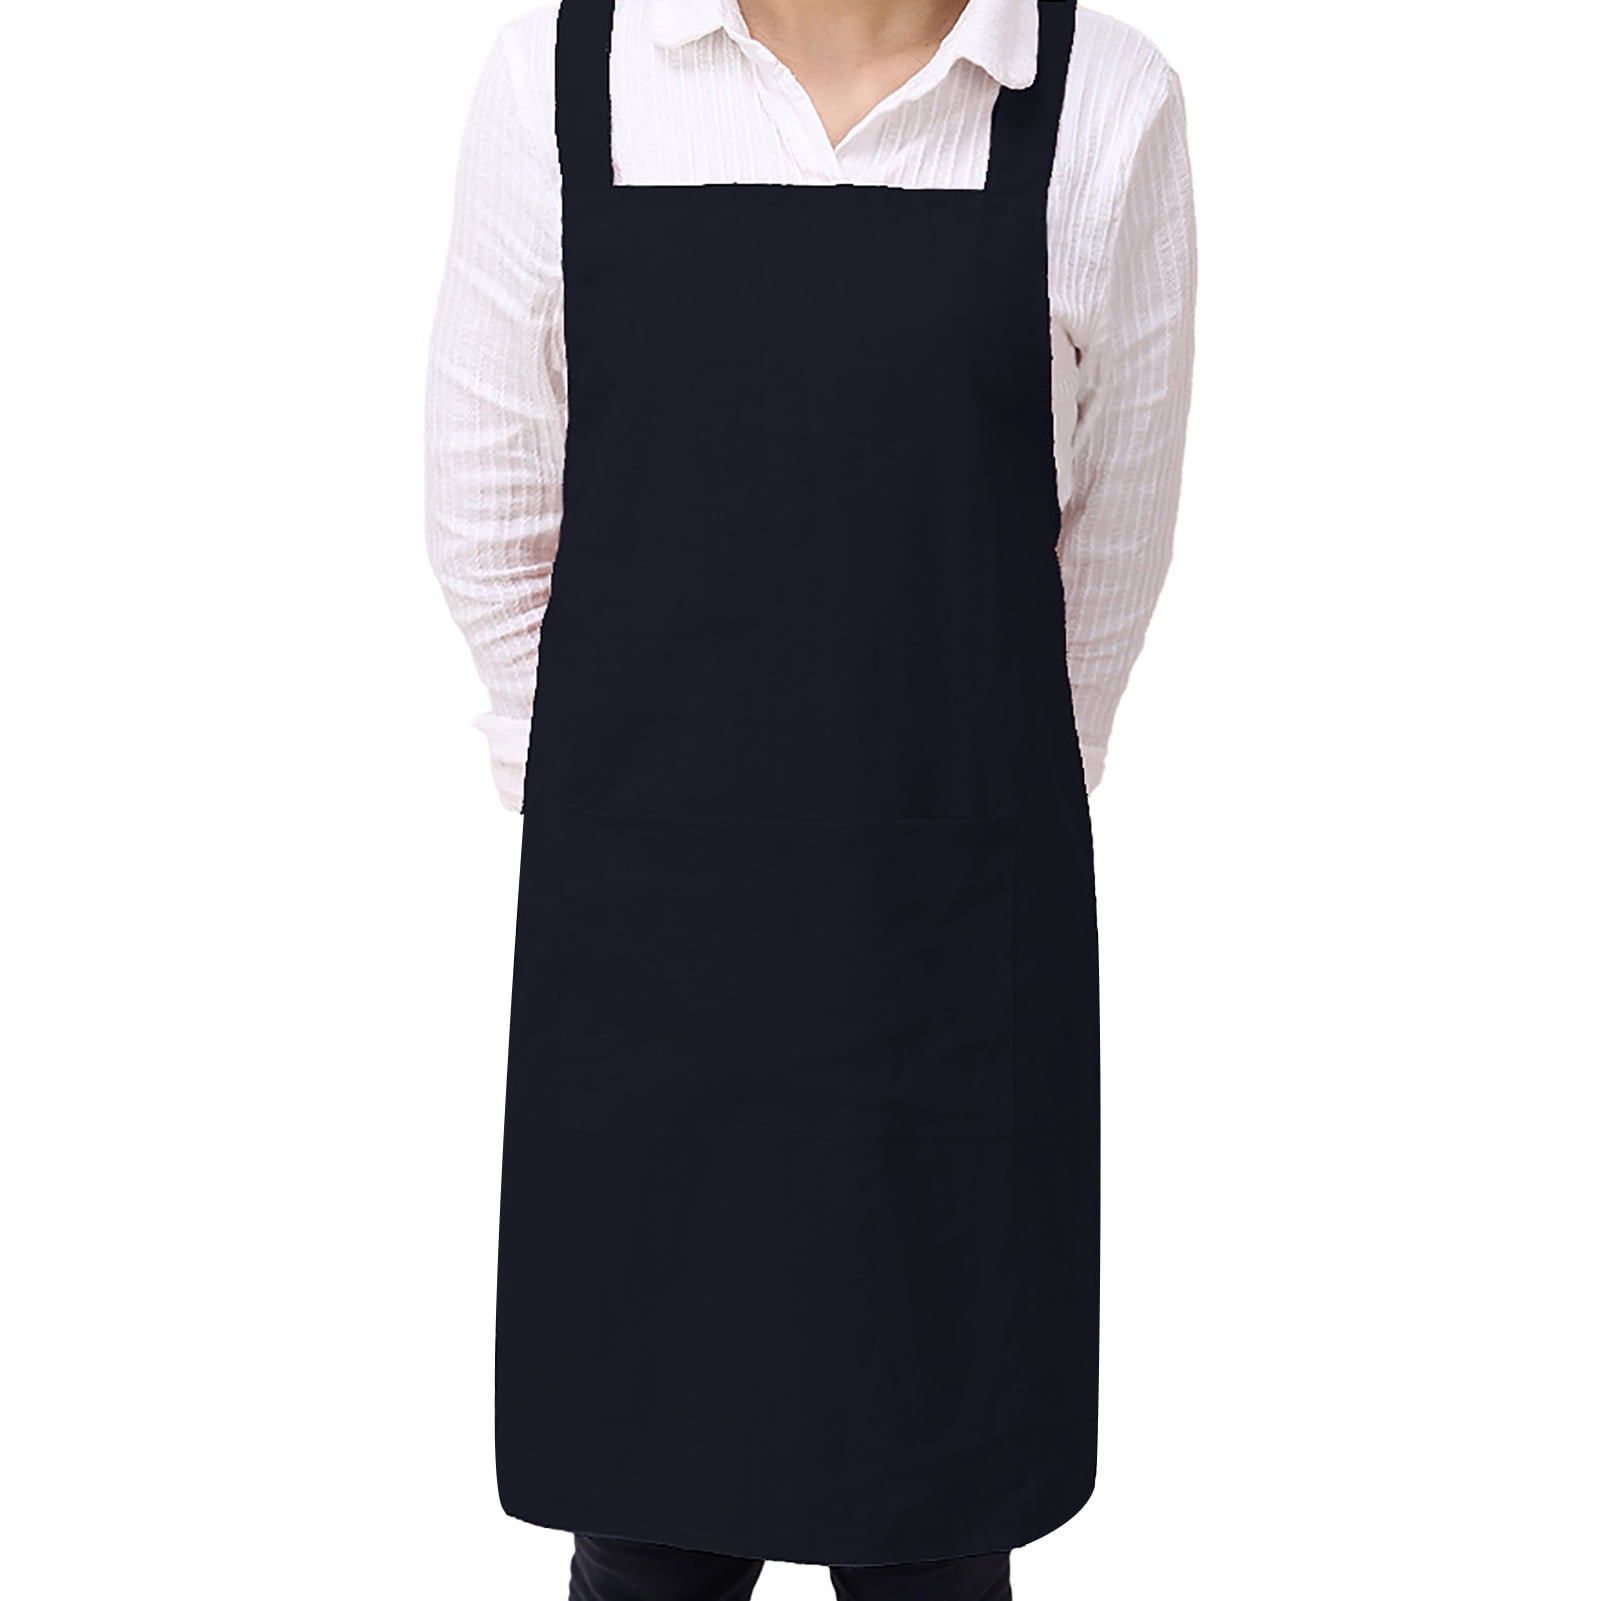 Cotton twill apron personalised with a leather patch